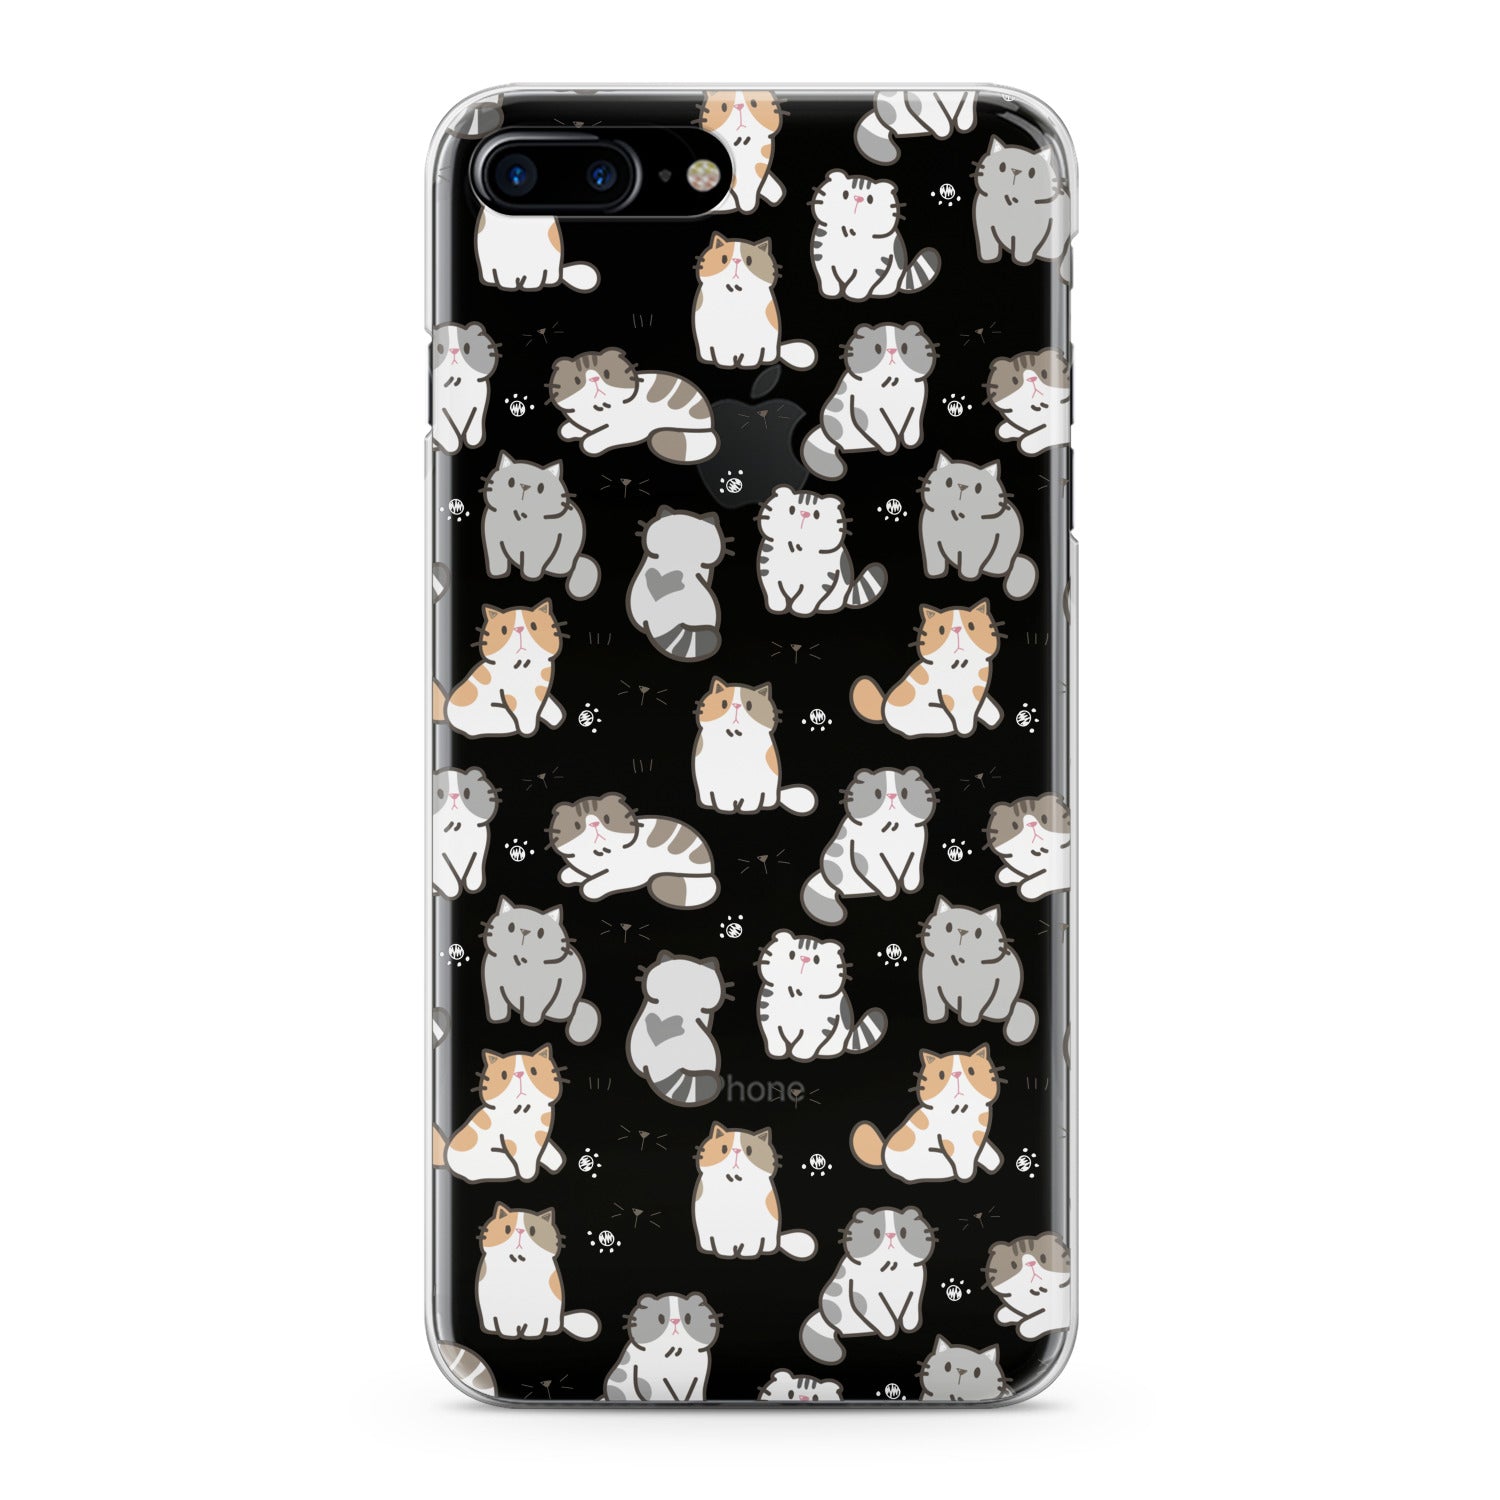 Lex Altern Kawaii Felines Phone Case for your iPhone & Android phone.